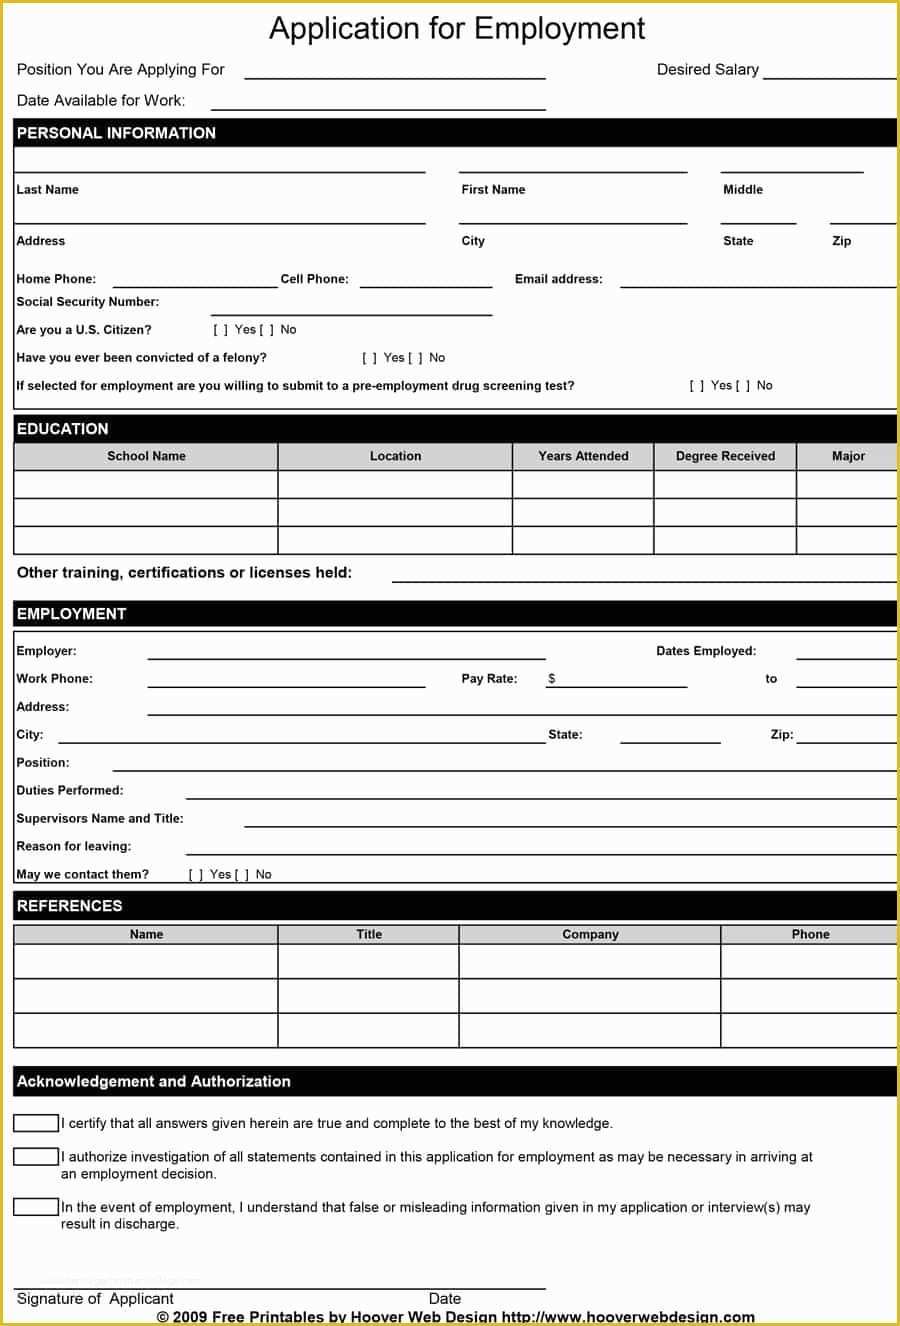 Free Printable Application for Employment Template Of Employment Application Template